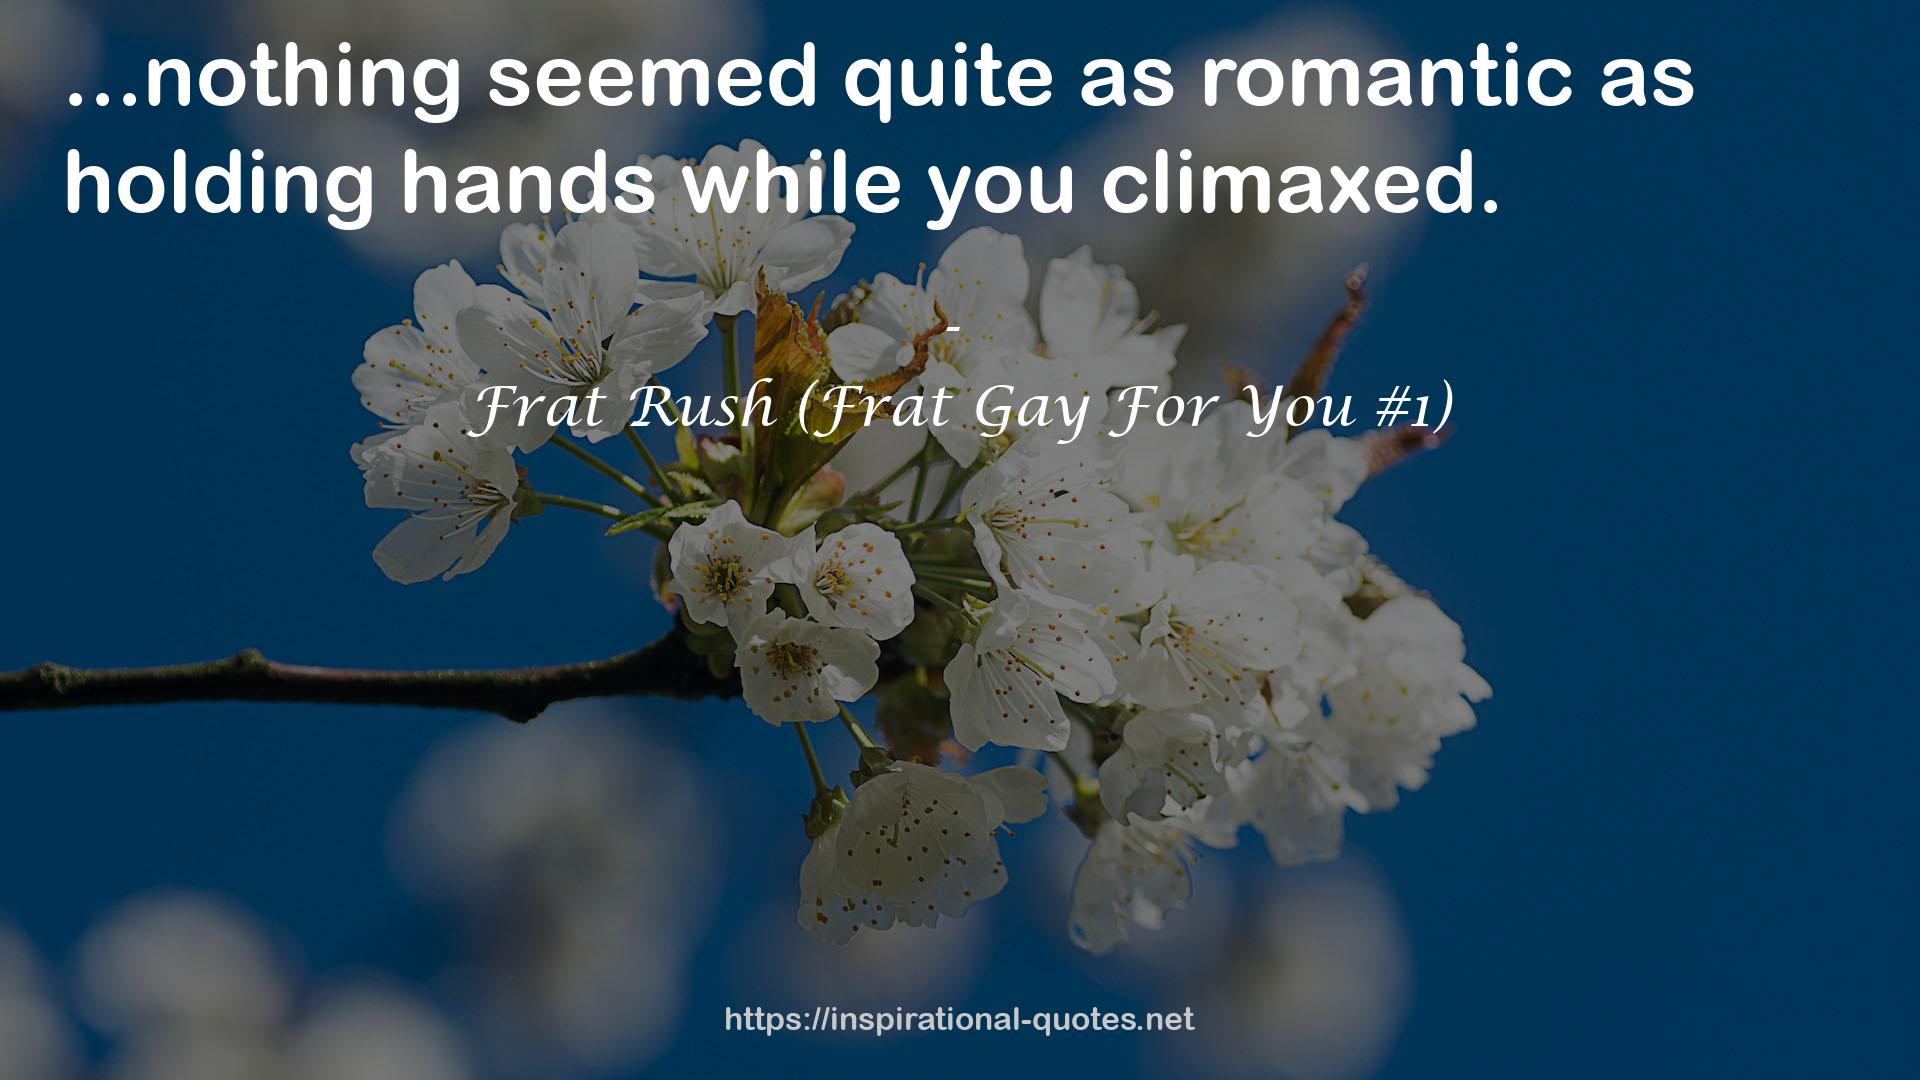 Frat Rush (Frat Gay For You #1) QUOTES